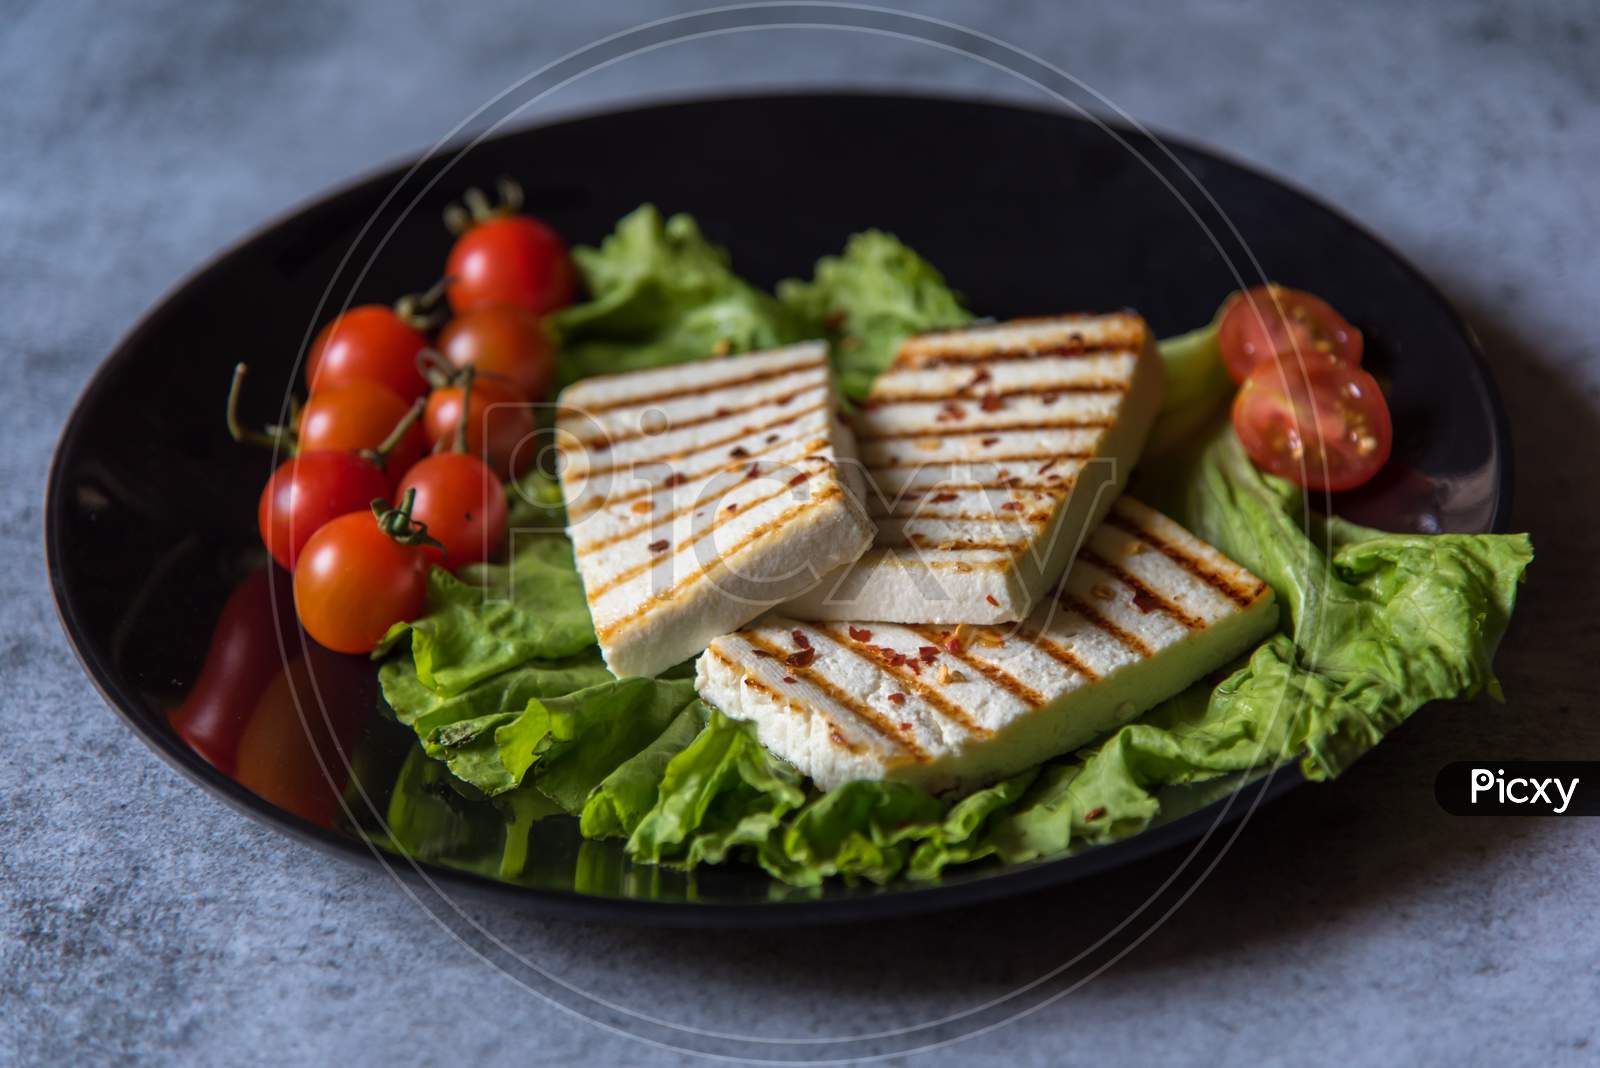 Delicious grilled paneer or cottage cheese and vegetables.